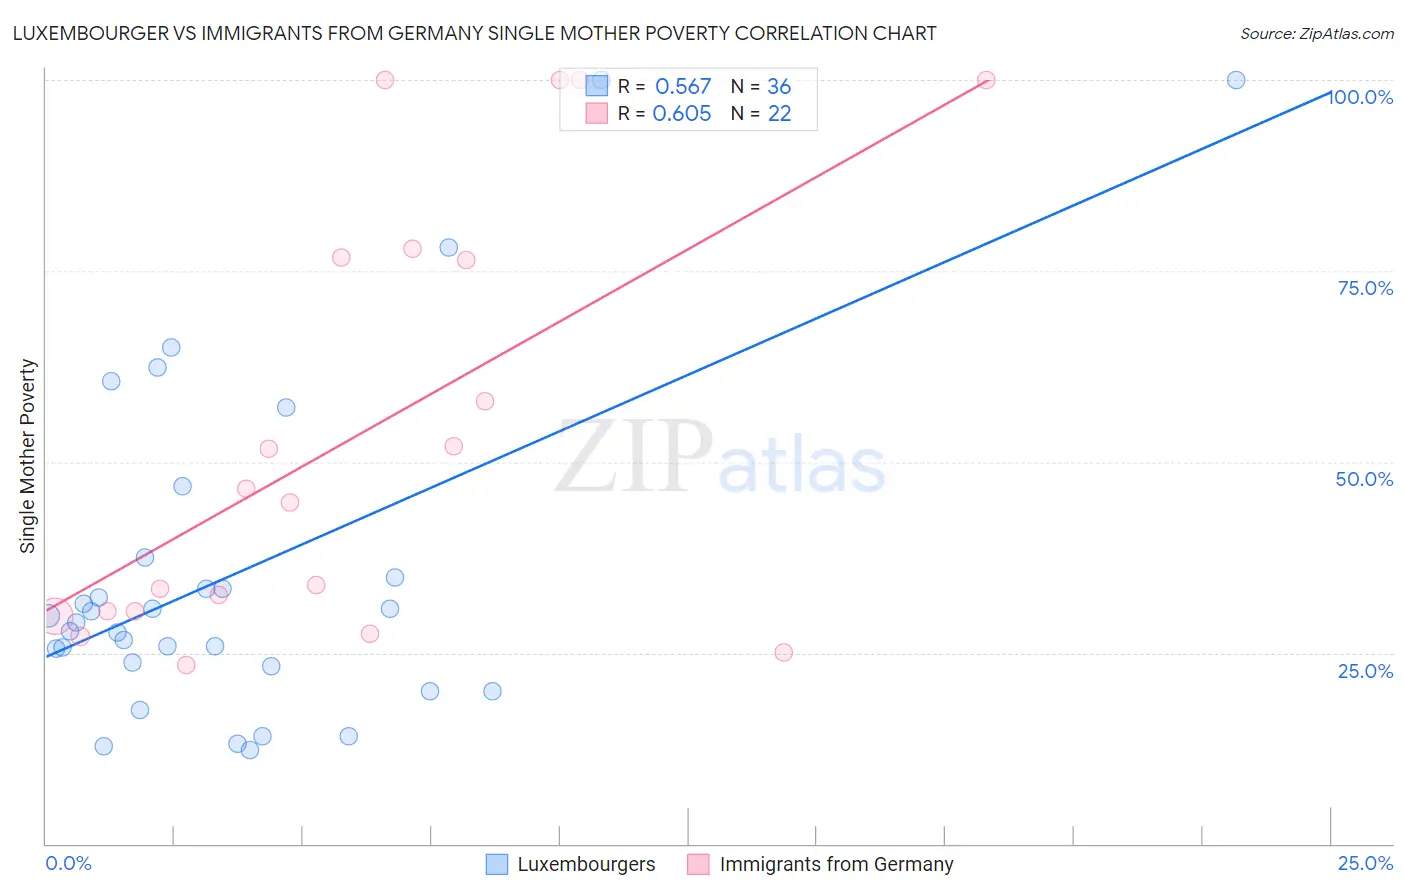 Luxembourger vs Immigrants from Germany Single Mother Poverty